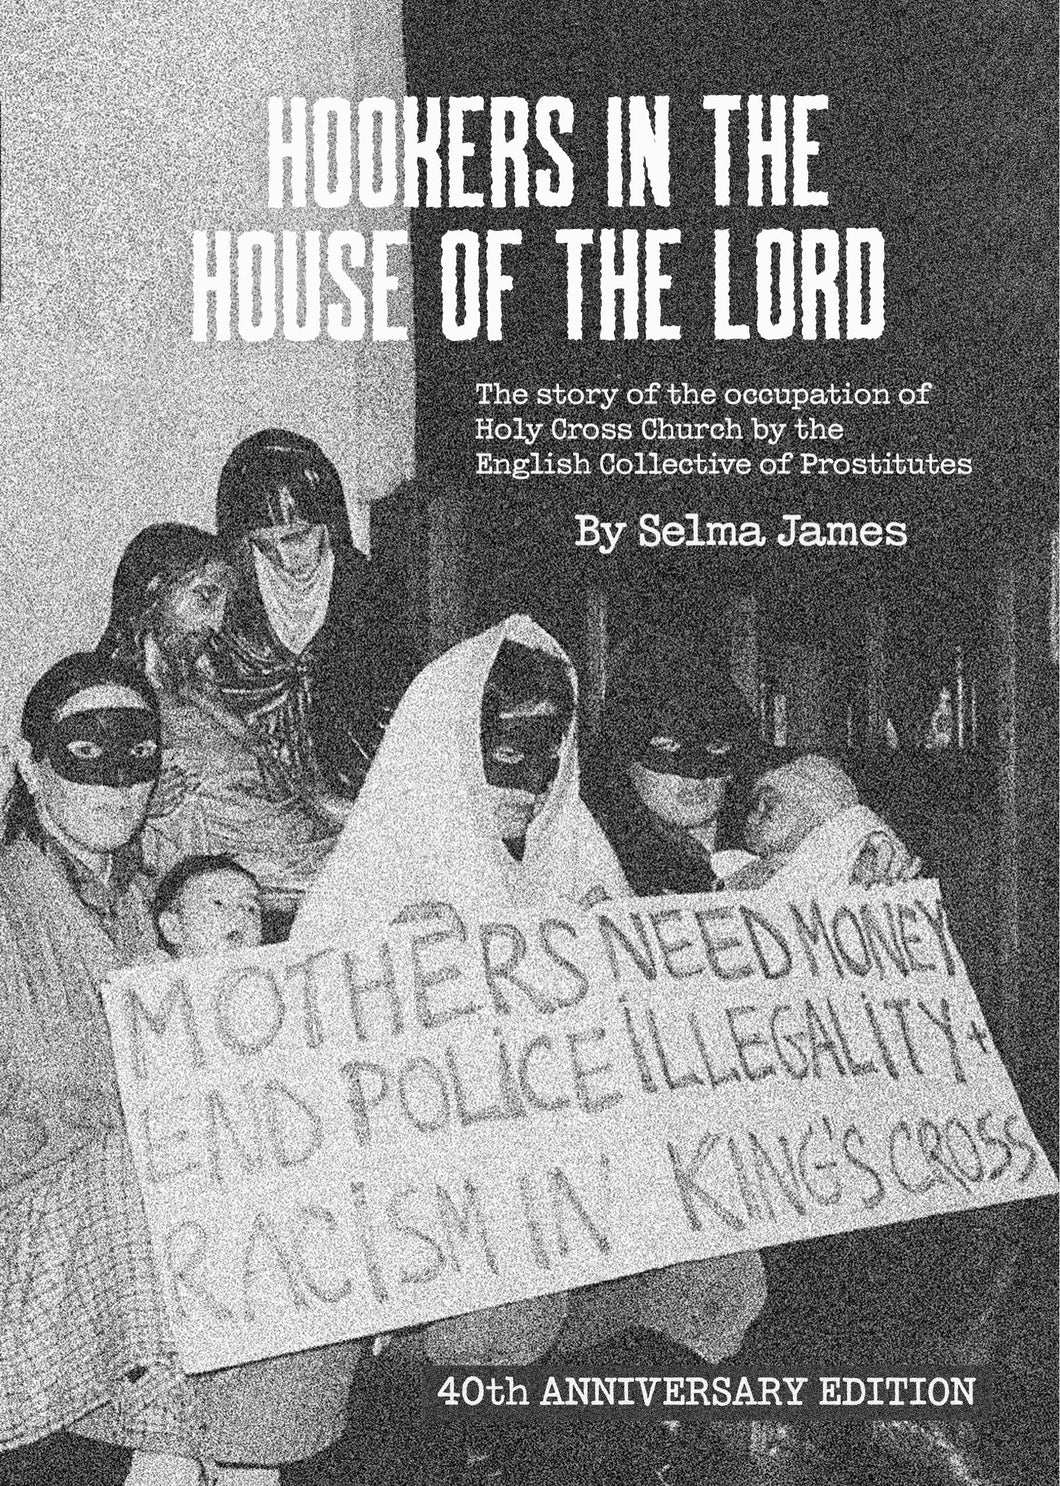 Hookers in the House of the Lord (40th anniversary edition)